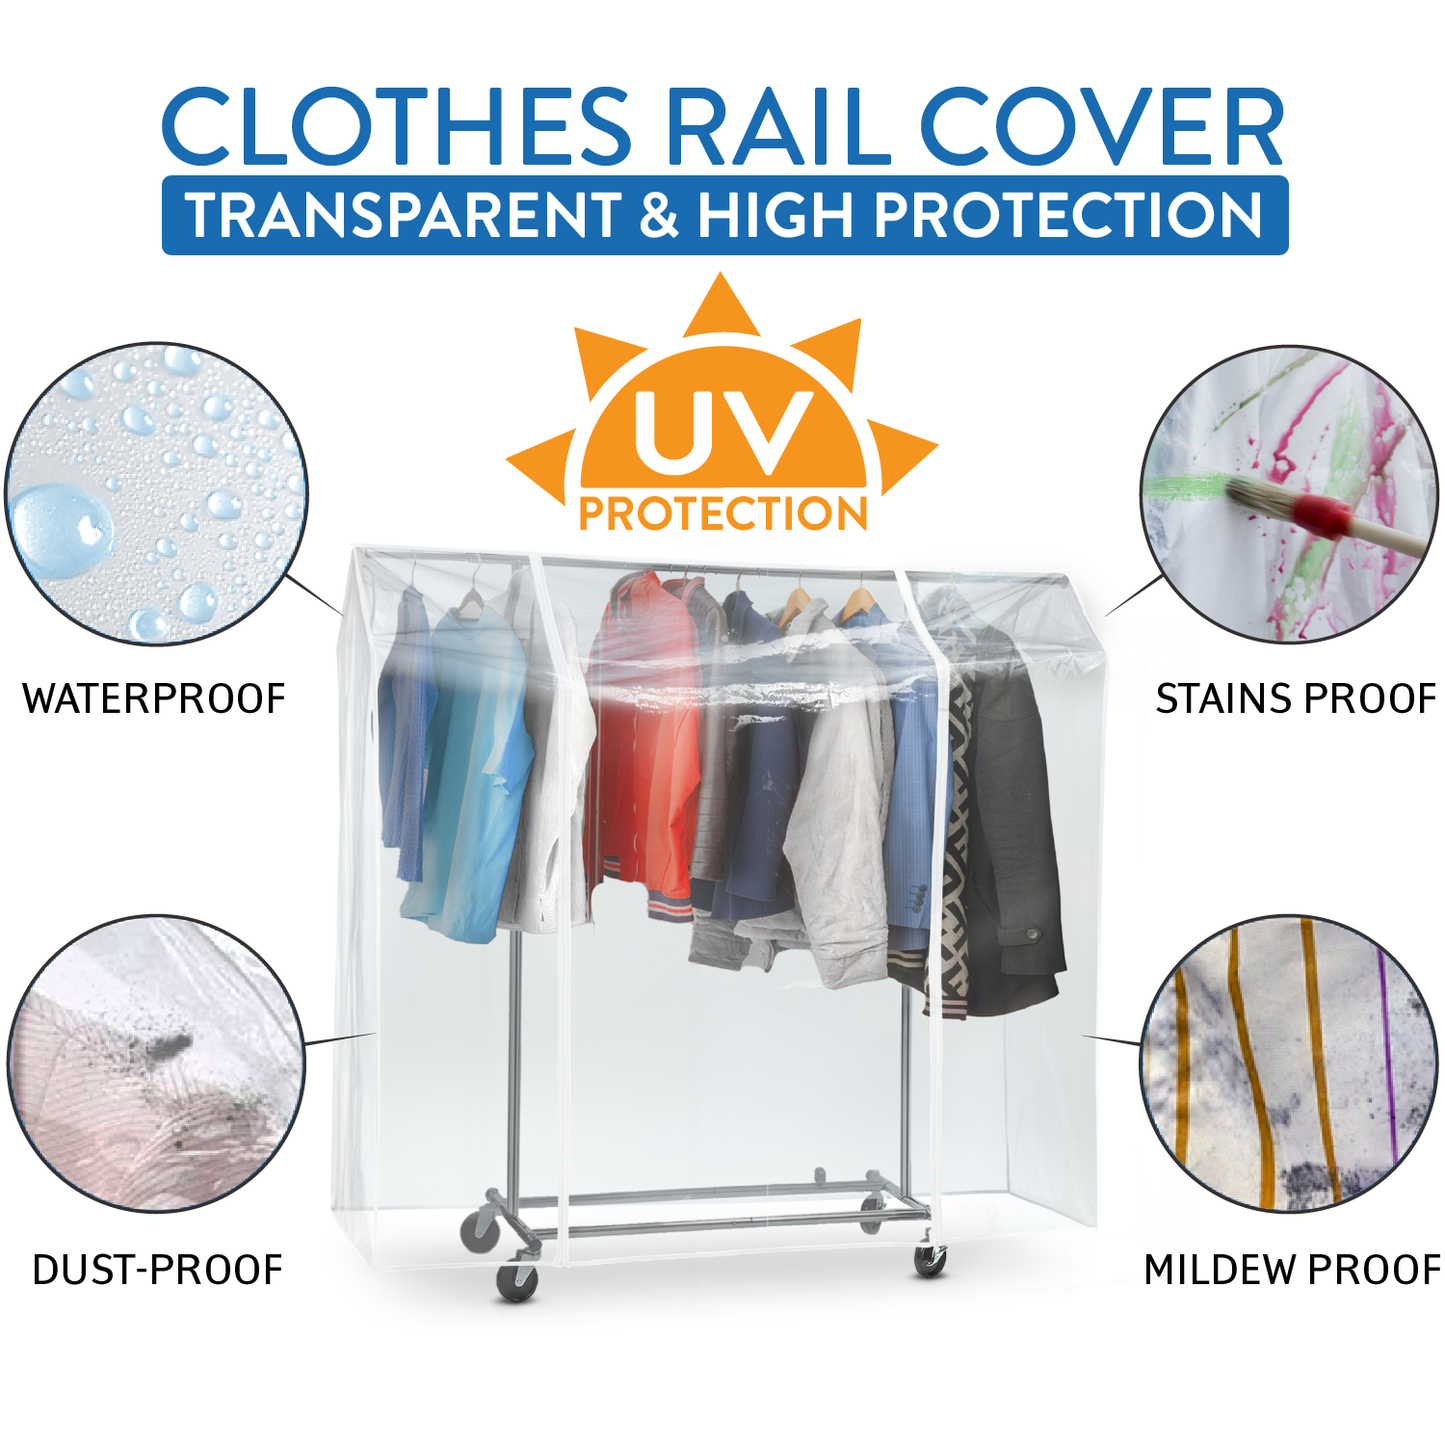 Clothes Rail Cover, Cover for Clothes Rail, Transparent, Protection from Dust, Dirt, UV Rays, Rain, Tatkraft Anwalt, 2